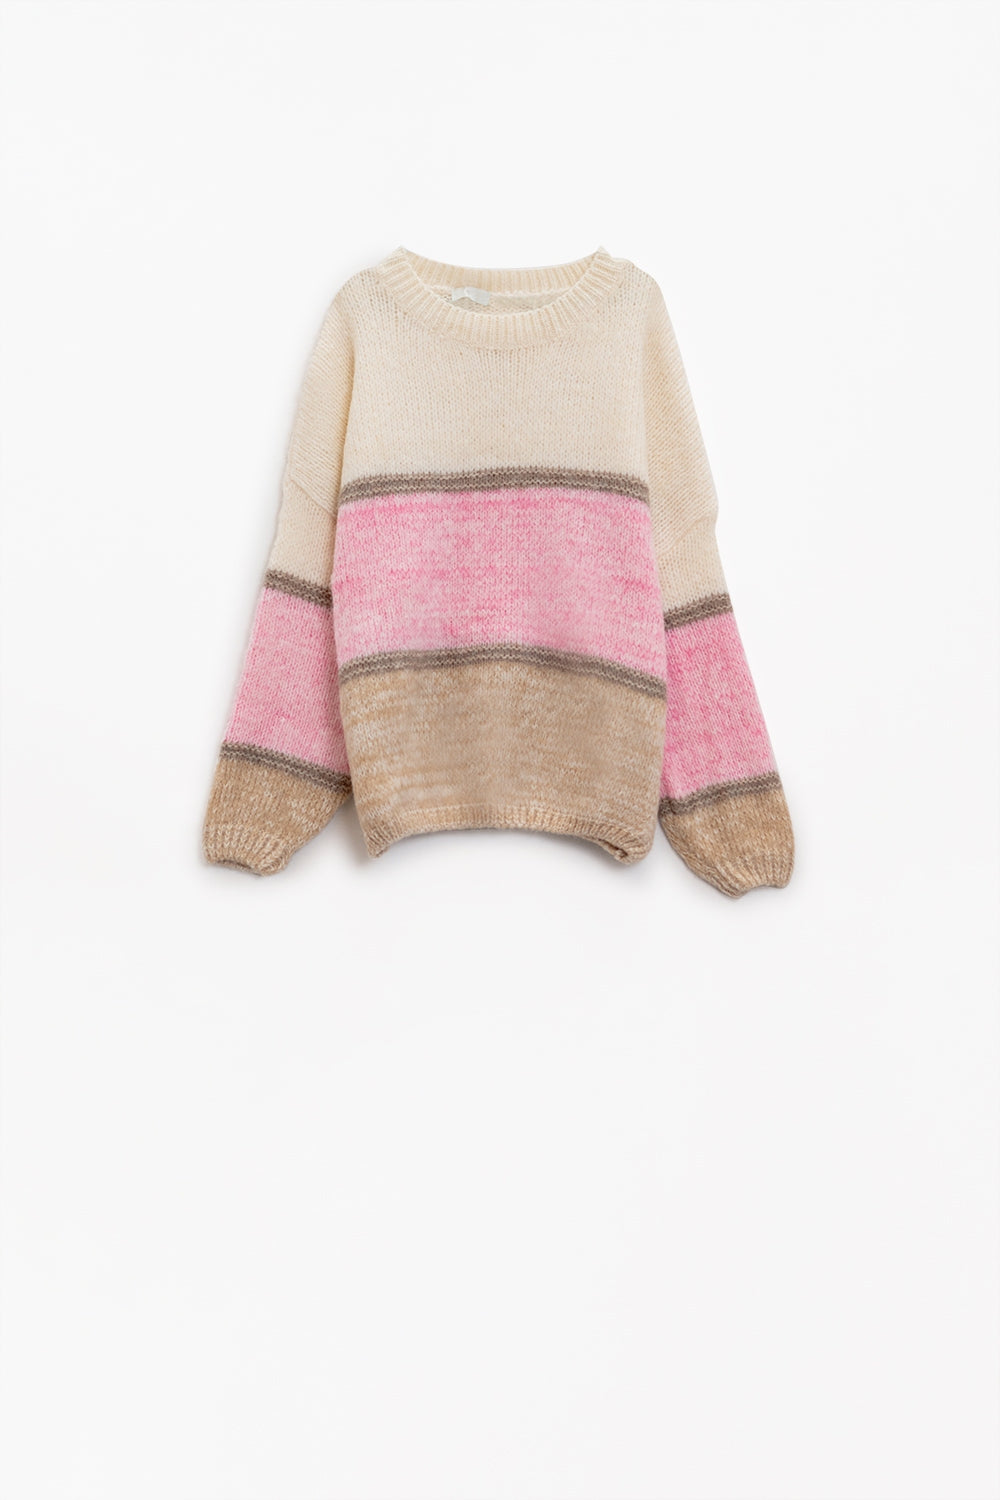 Q2 Sweater Stripe Design In Creme Pink and Brown With Crew Neck